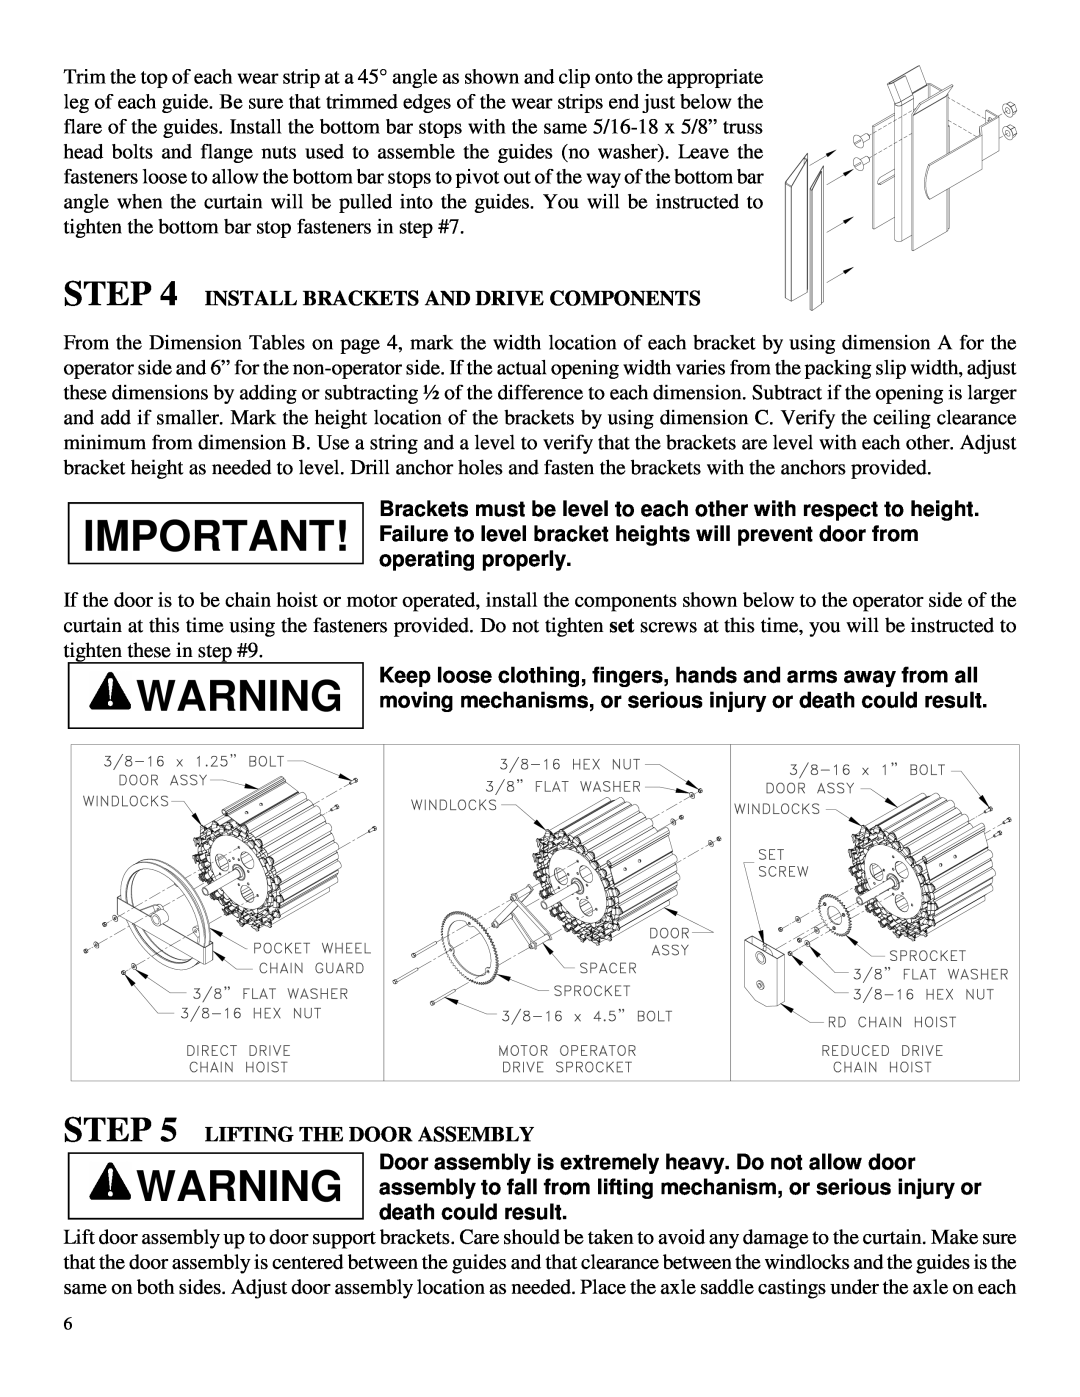 Wayne-Dalton DS-350 installation instructions Step, Install Brackets And Drive Components, Lifting The Door Assembly 